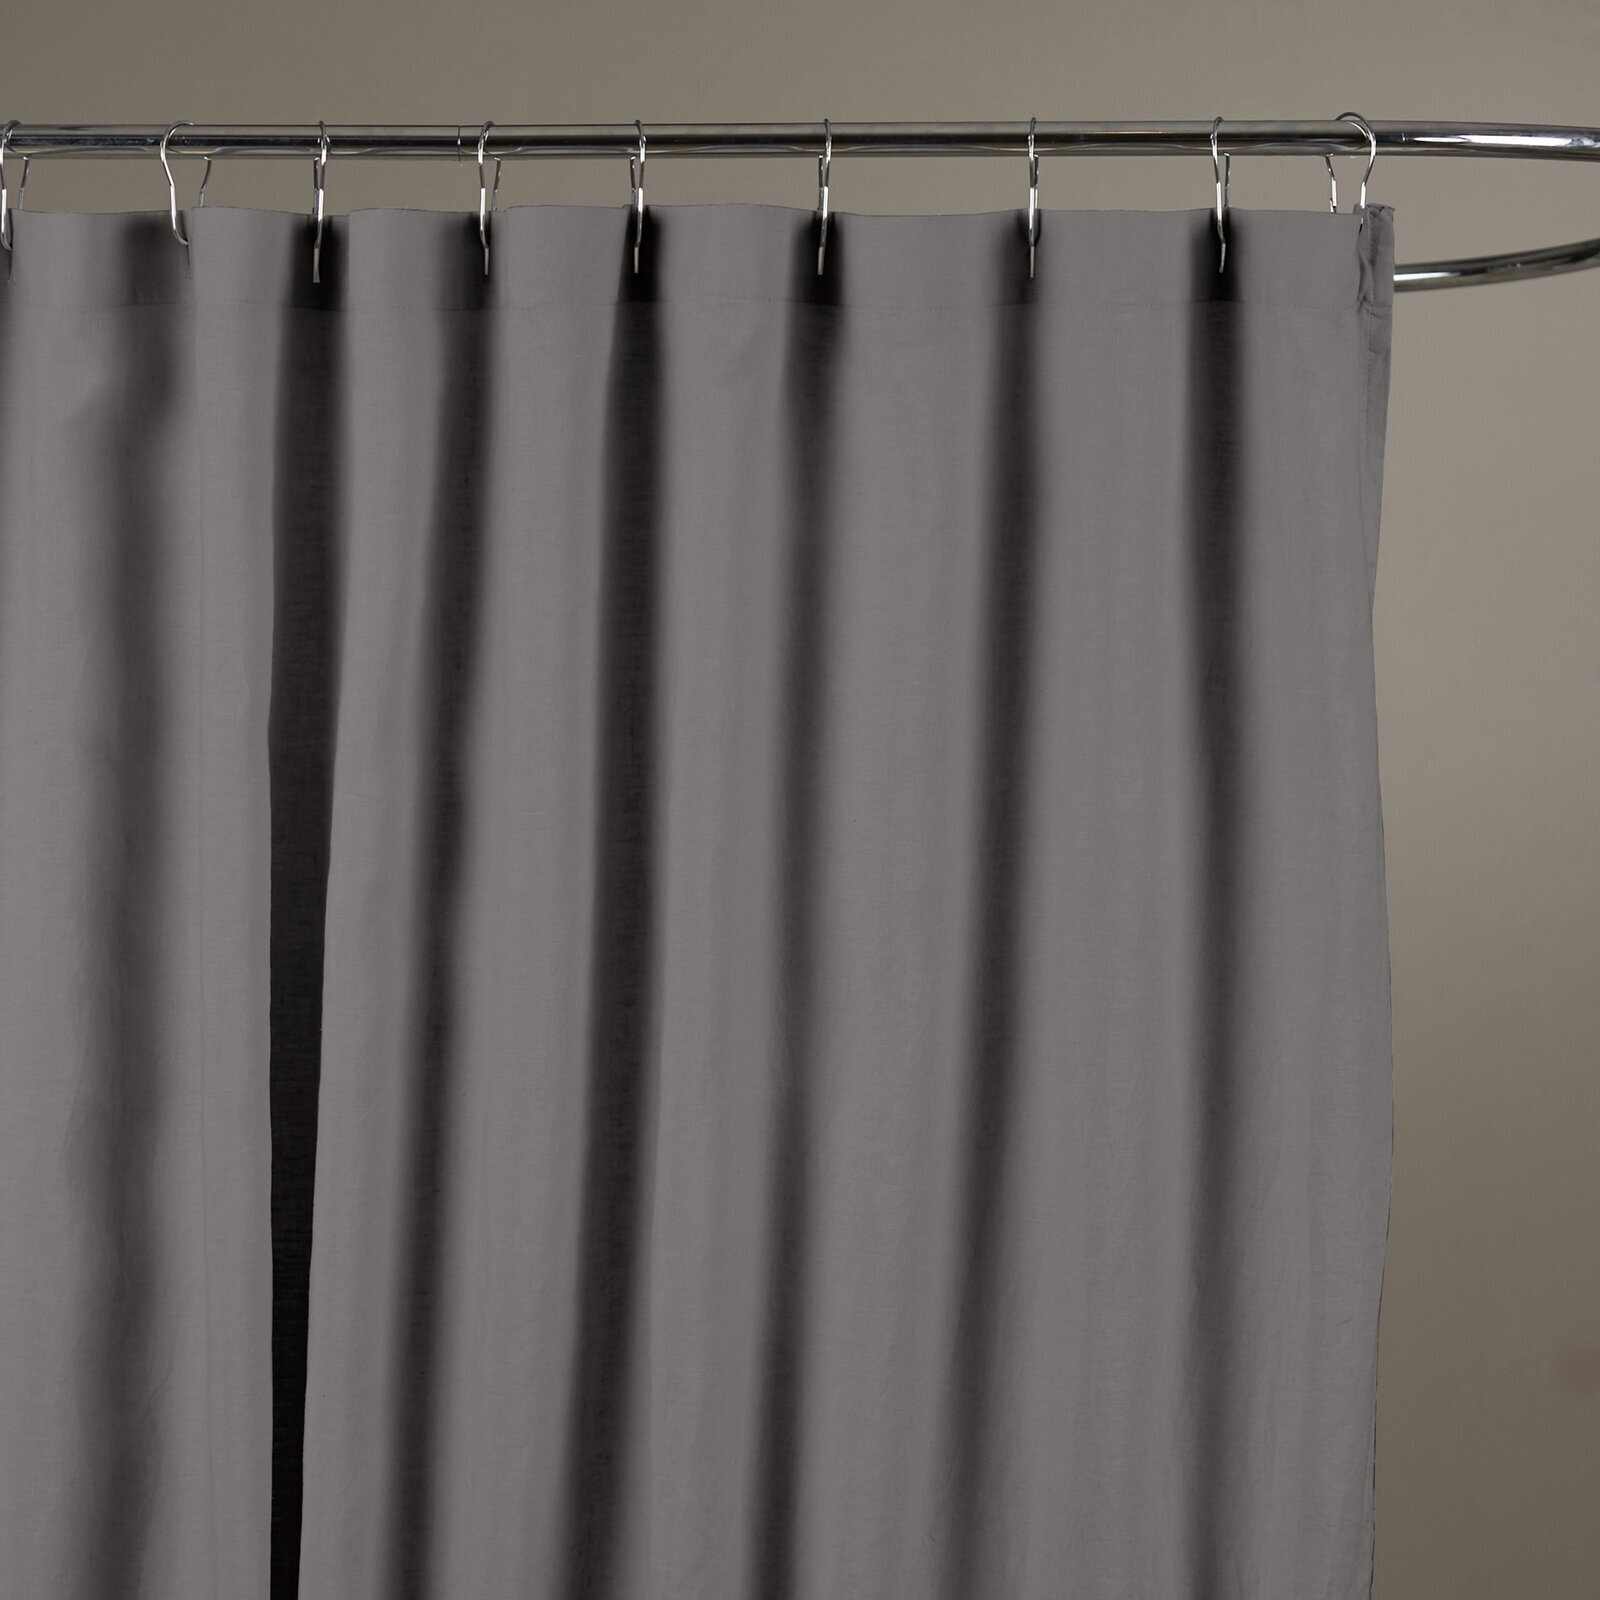 Minimalist Shower Curtain in Solid Color